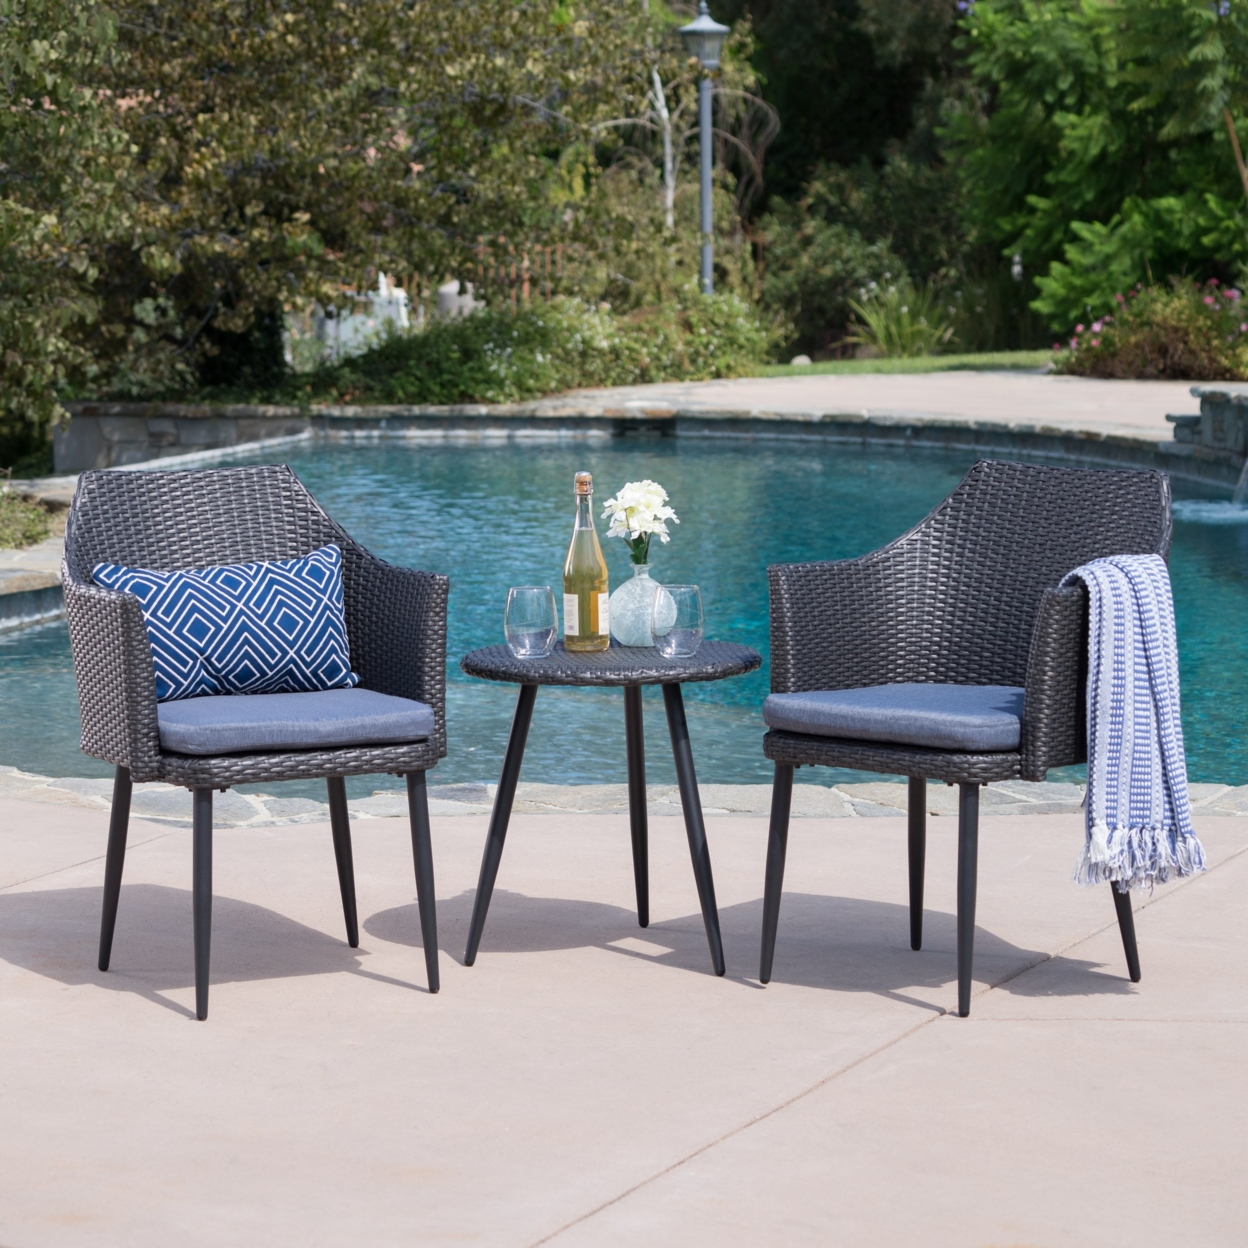 Ibiza Outdoor 3 Piece Wicker Chat Set With Water Resistant Cushions - Textured Beige, Brown Wicker